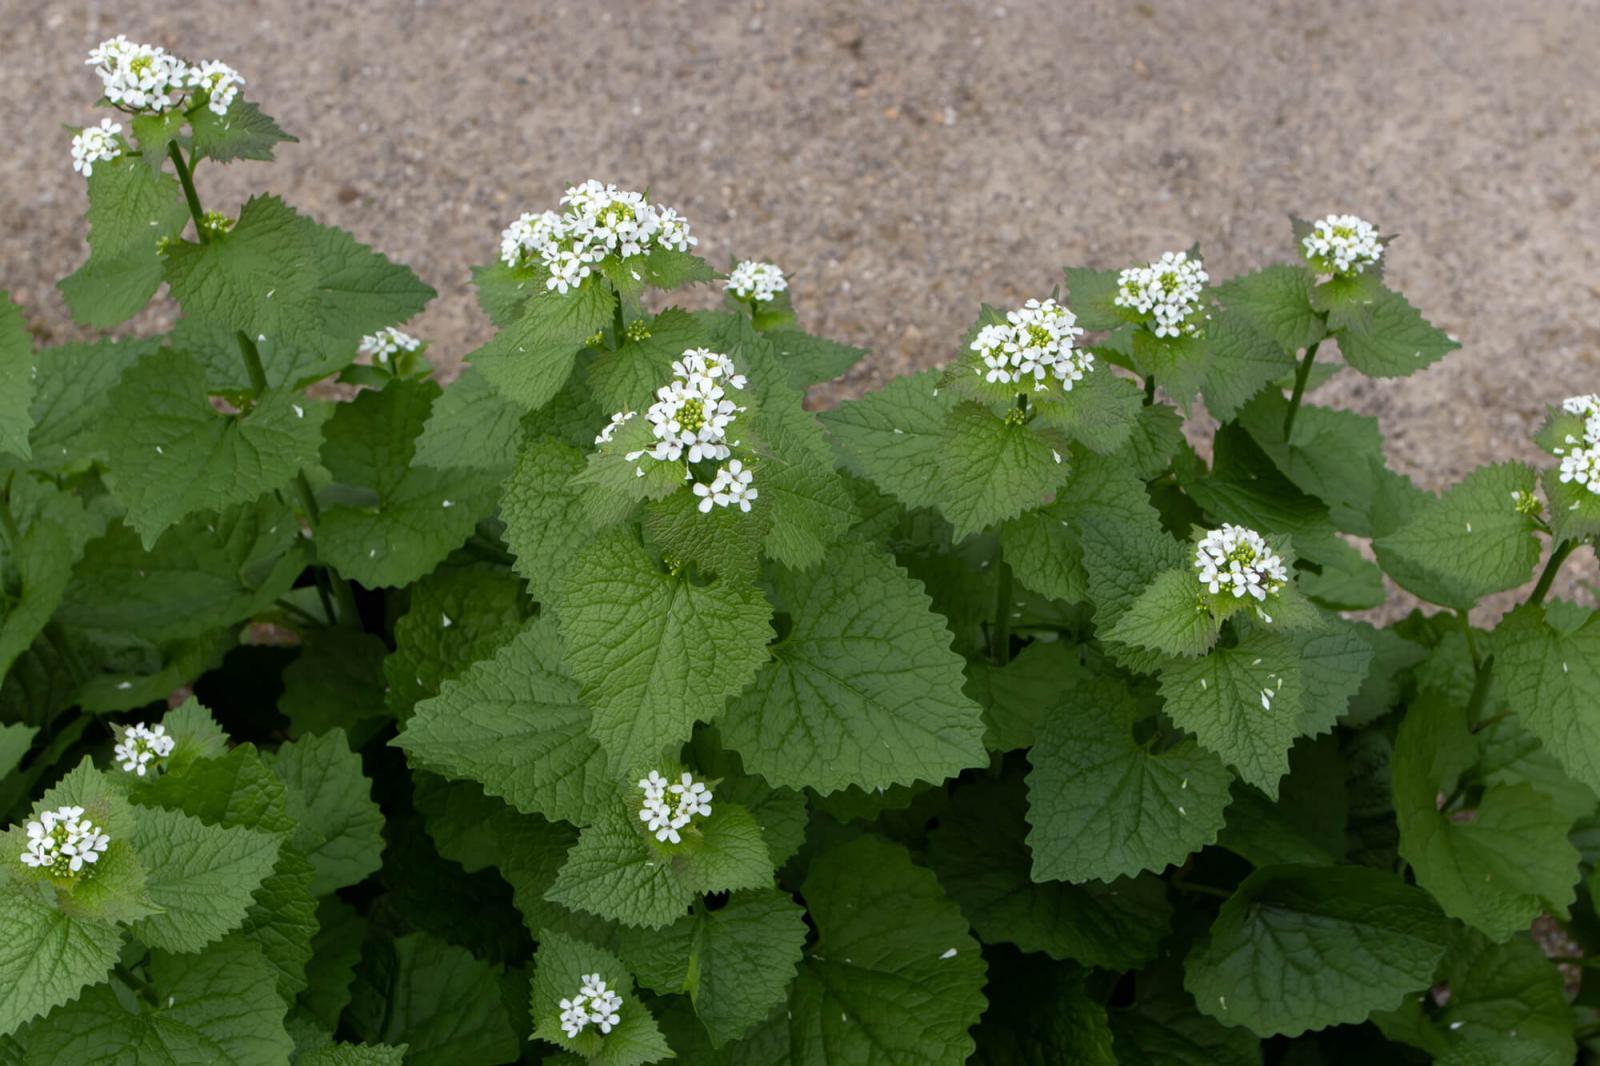 Garlic mustard can actually alter the soil chemistry and inhibit all other plants from growing in your garden.